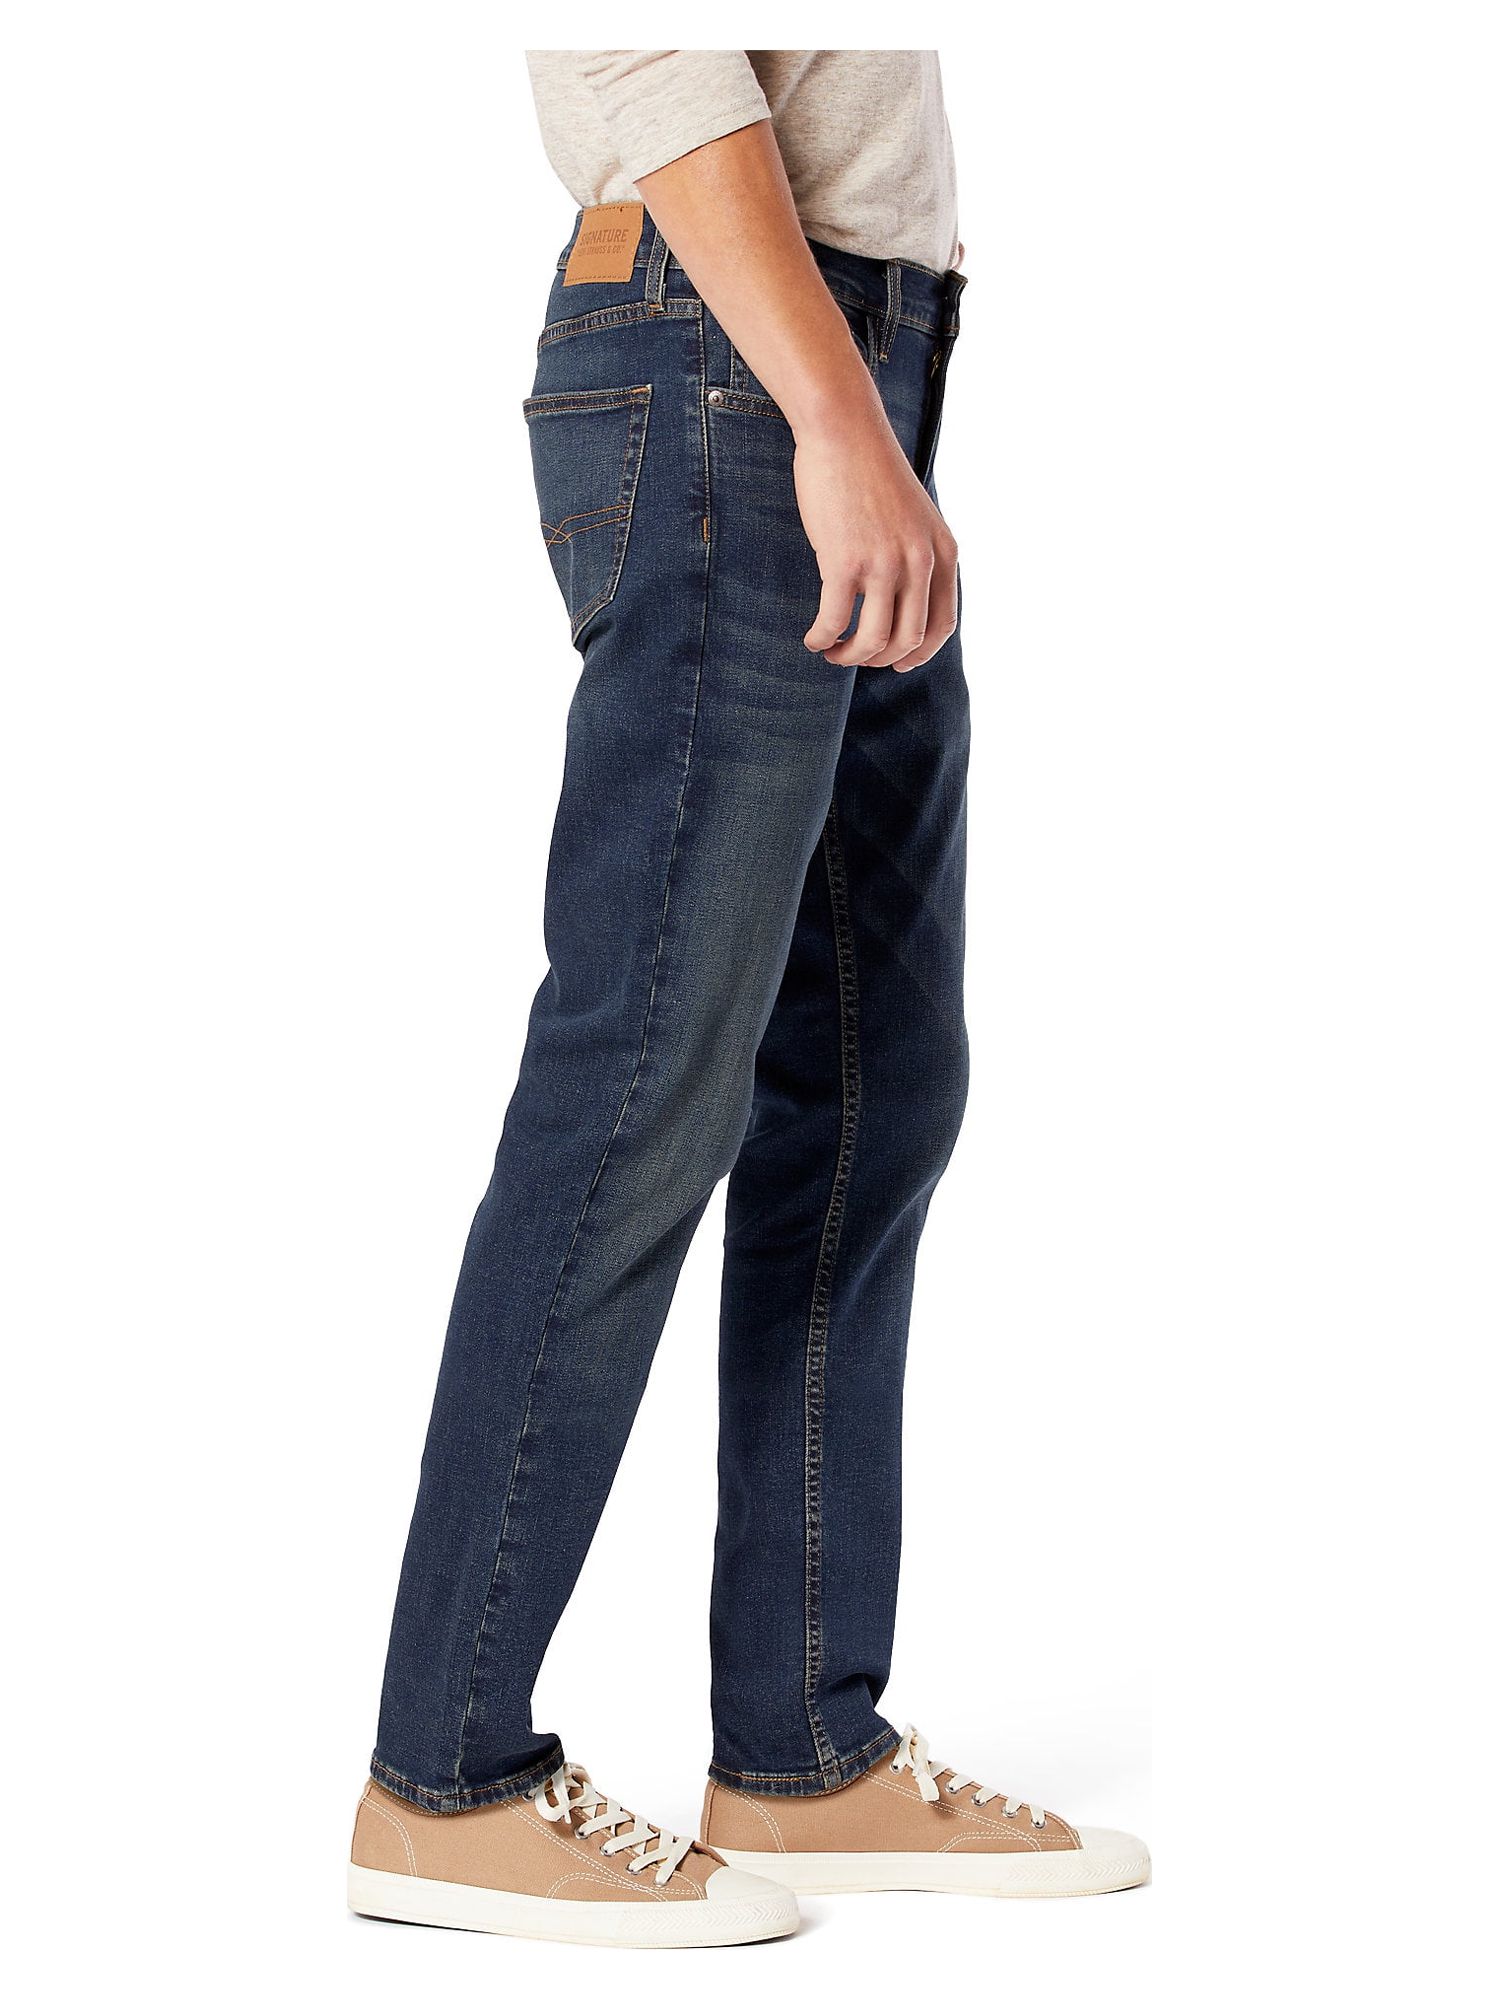 Signature by Levi Strauss & Co. Men's and Big Men's Slim Fit Jeans - image 5 of 6